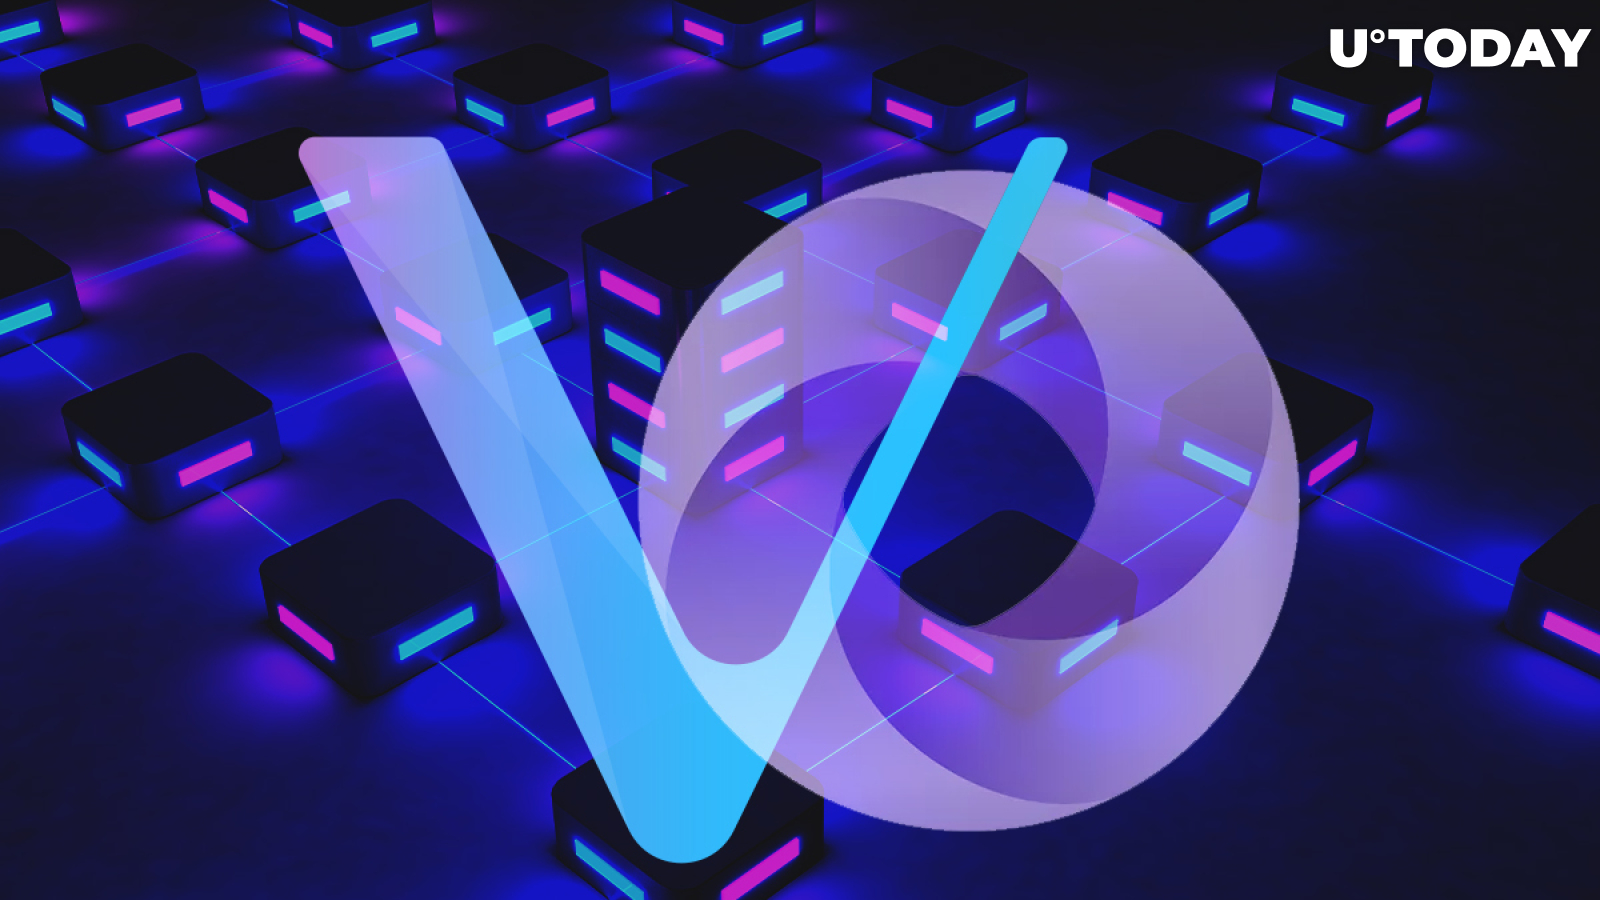 VeChain Joins Forces with One of the World’s Largest Professional Services Networks to Roll Out New Blockchain Solutions